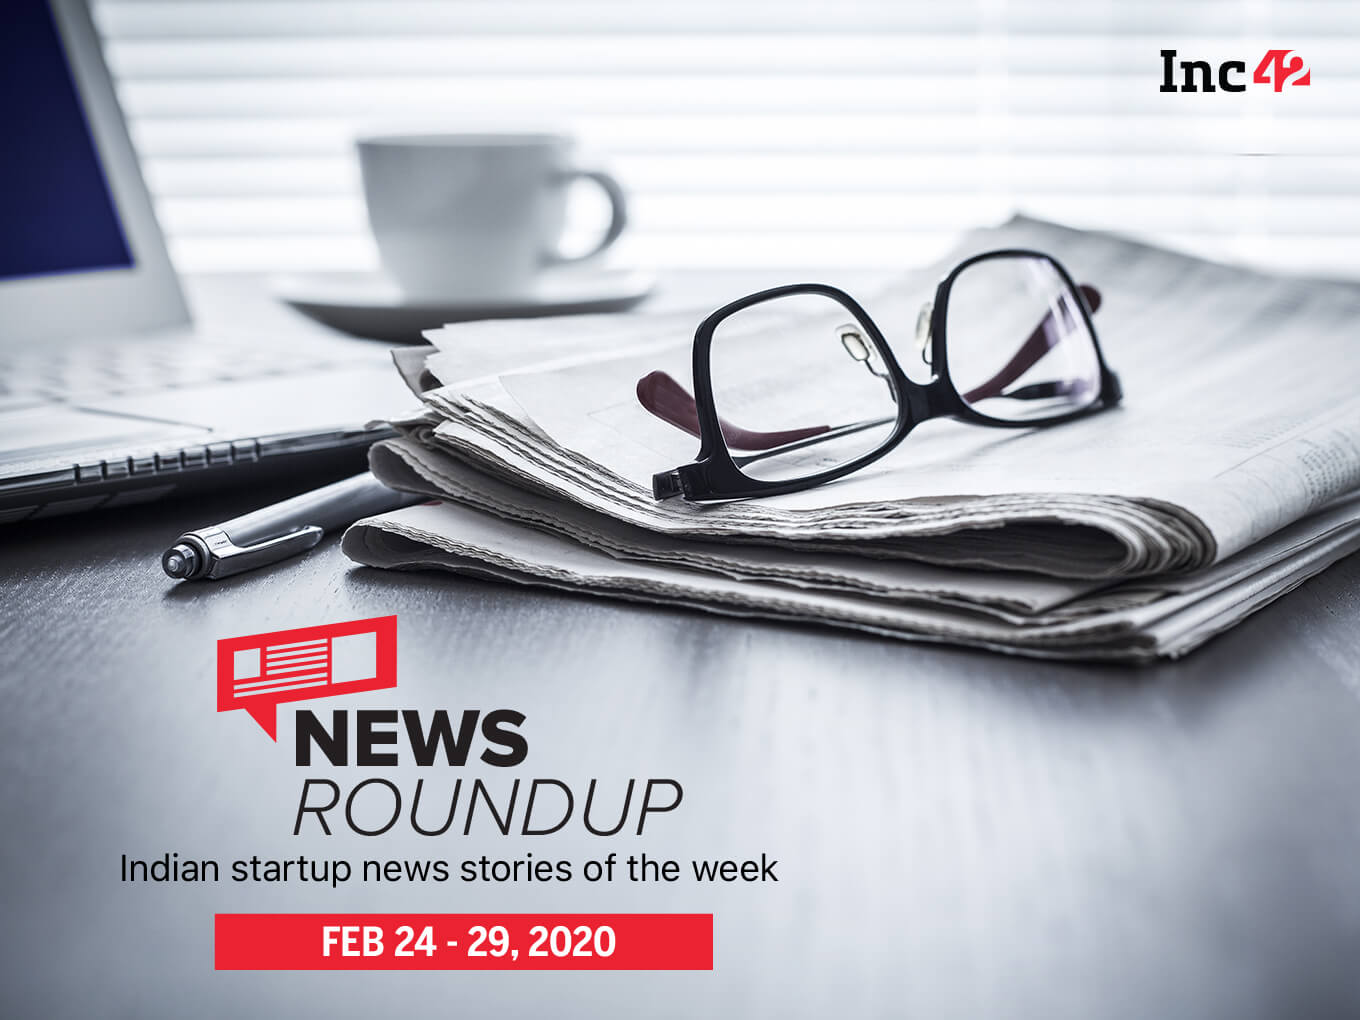 News Roundup: 11 Indian Startup News Stories You Don’t Want To Miss This Week [Feb 24 - Feb 29]